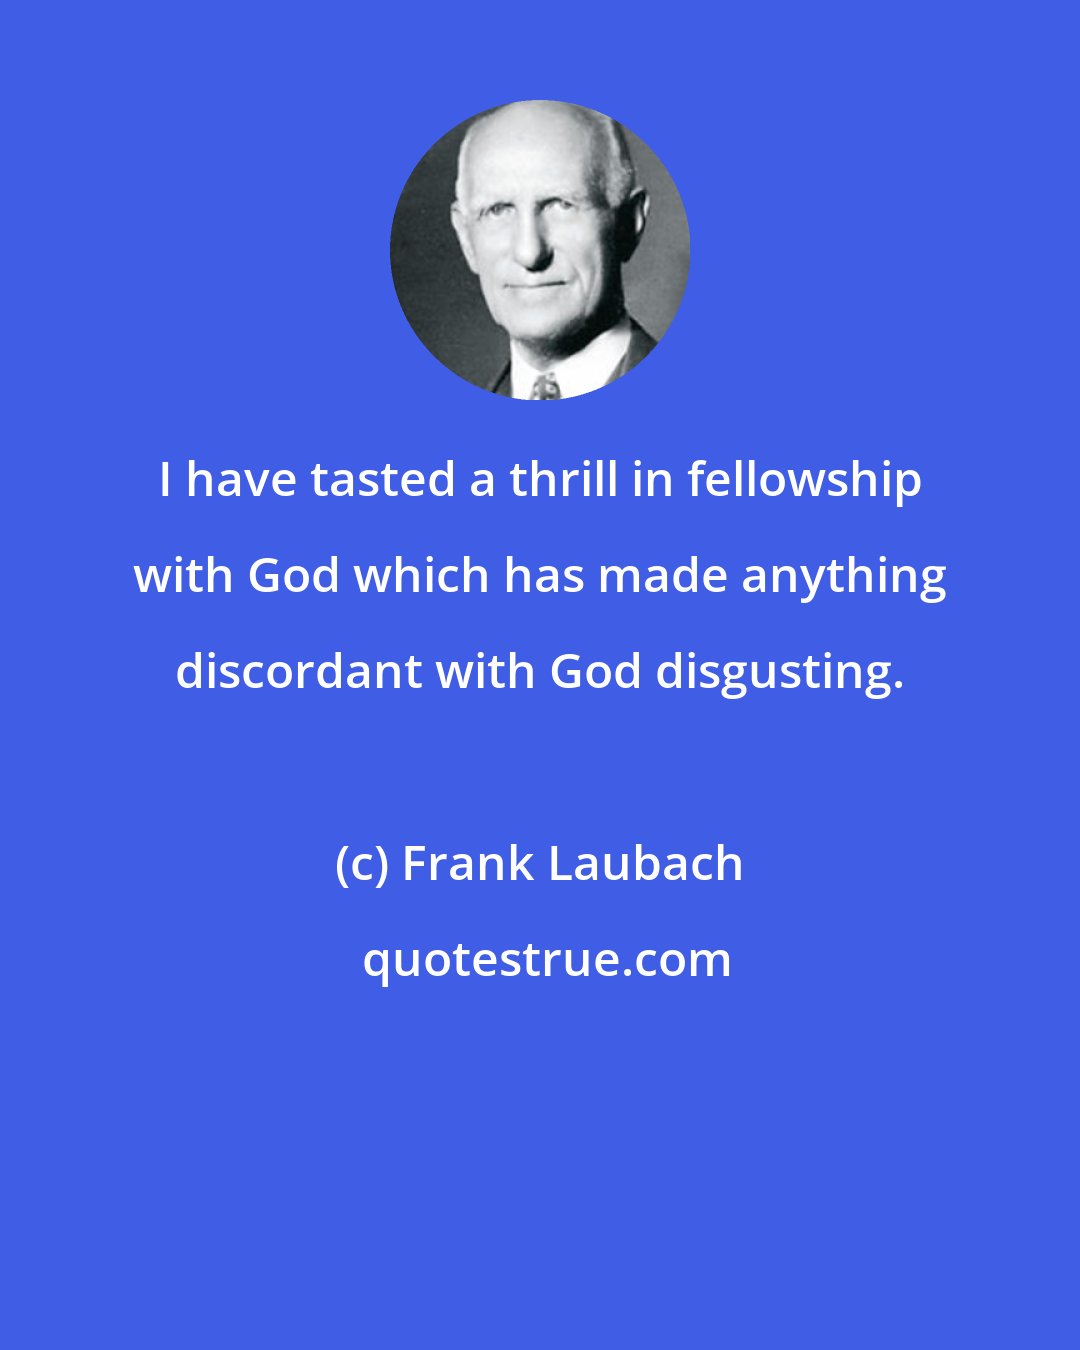 Frank Laubach: I have tasted a thrill in fellowship with God which has made anything discordant with God disgusting.